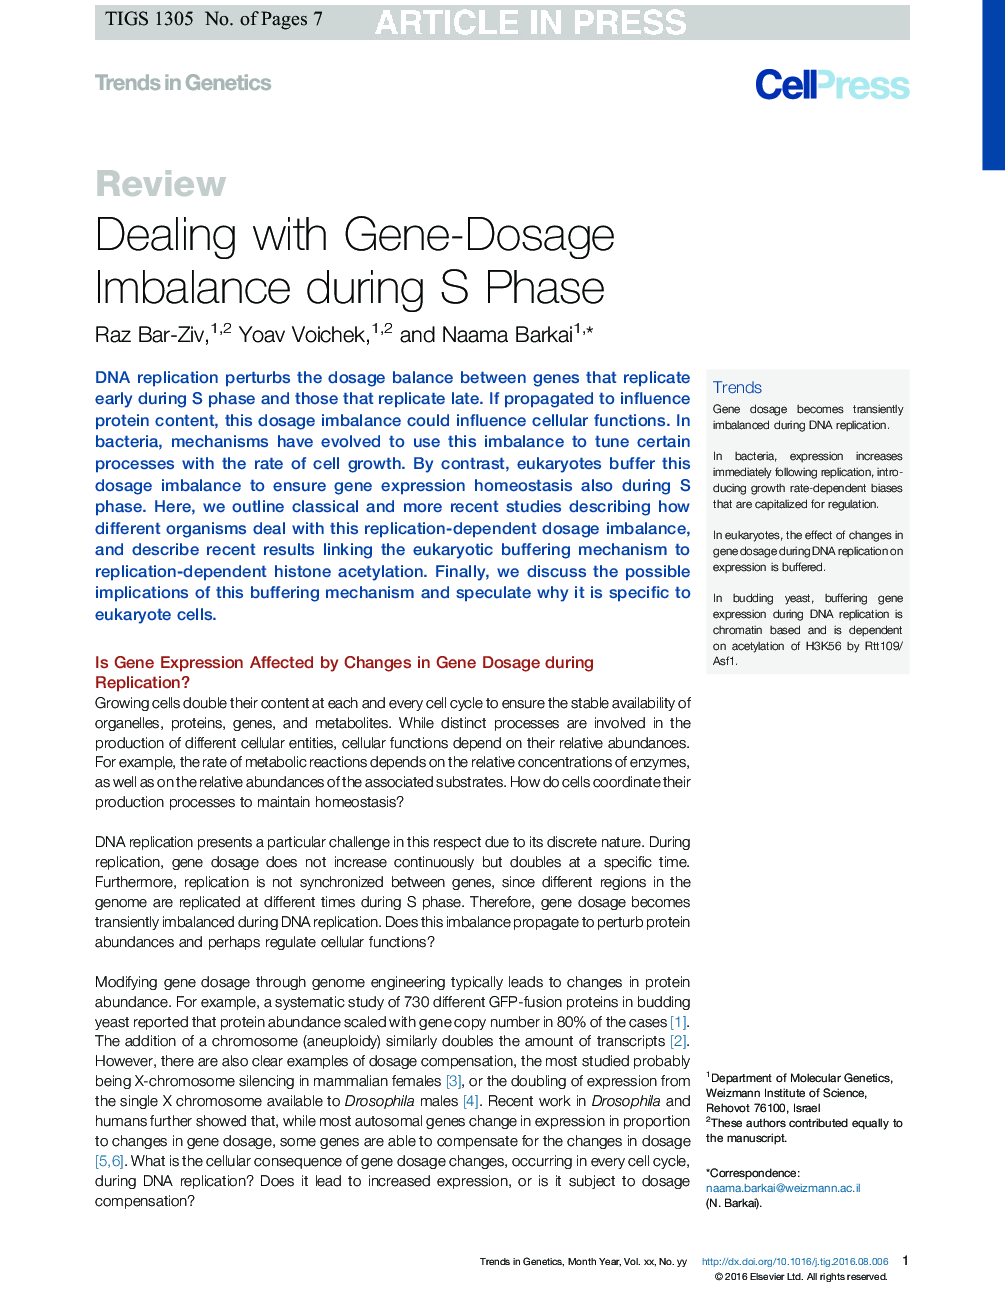 Dealing with Gene-Dosage Imbalance during S Phase